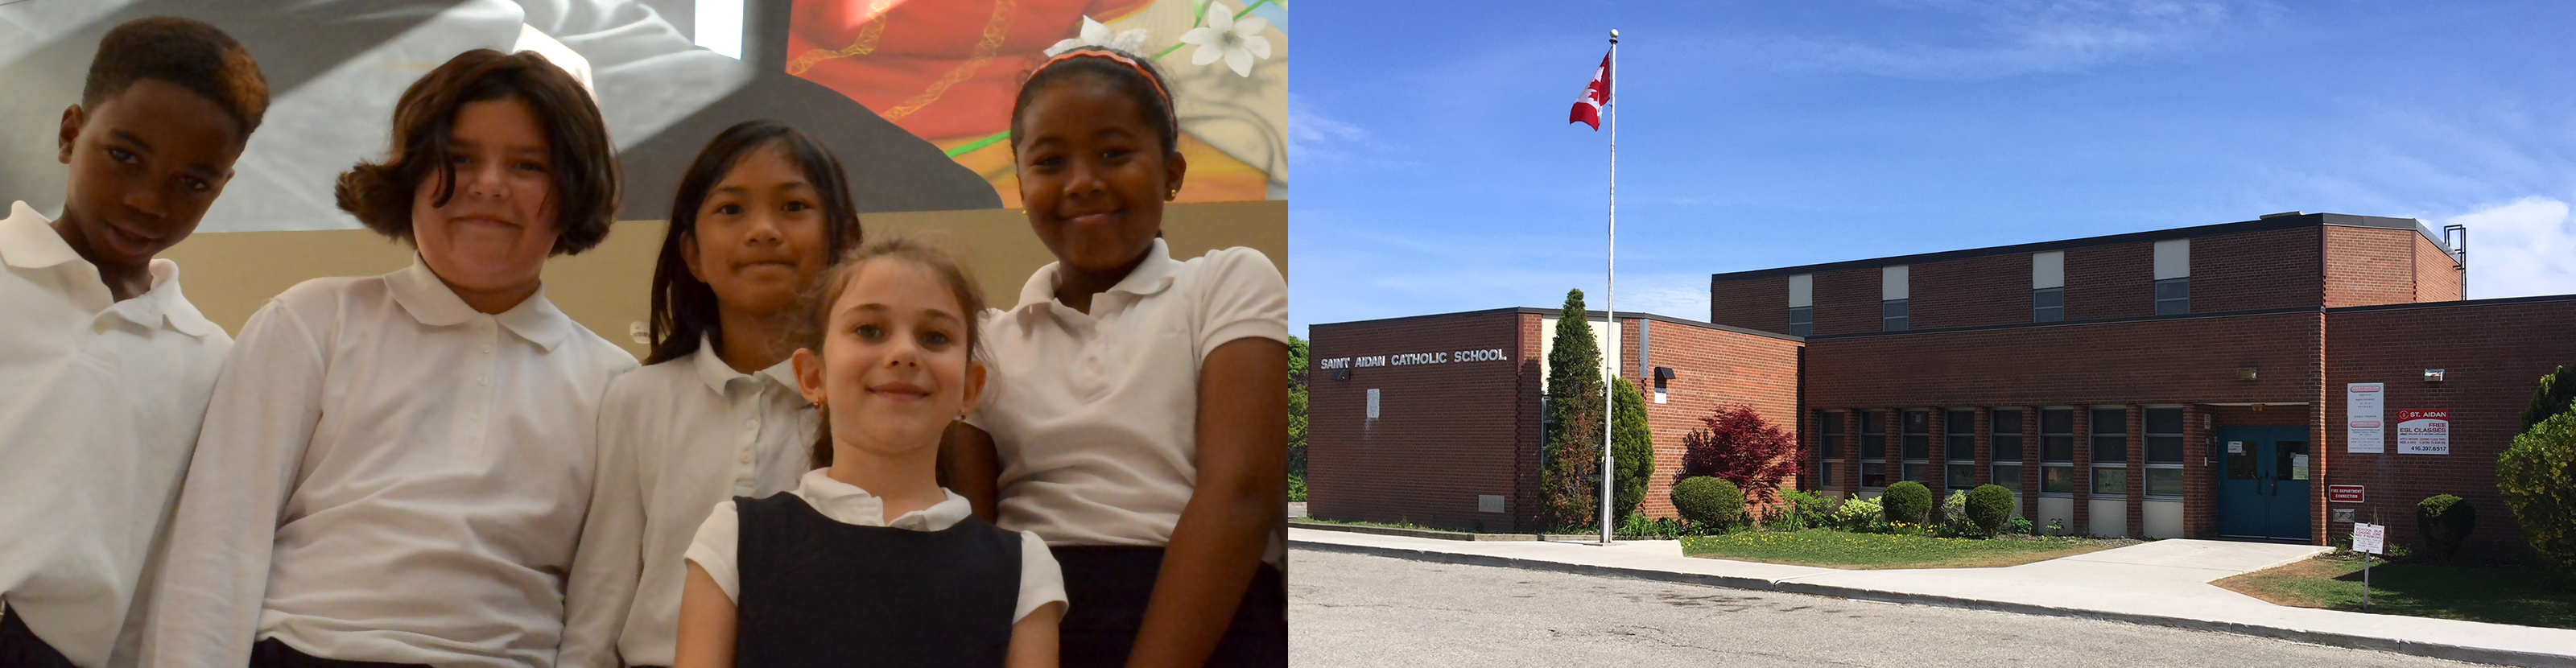 Left, a group of elementary students in white and navy school uniform. Right, the front of the St. Aidan Catholic School building.